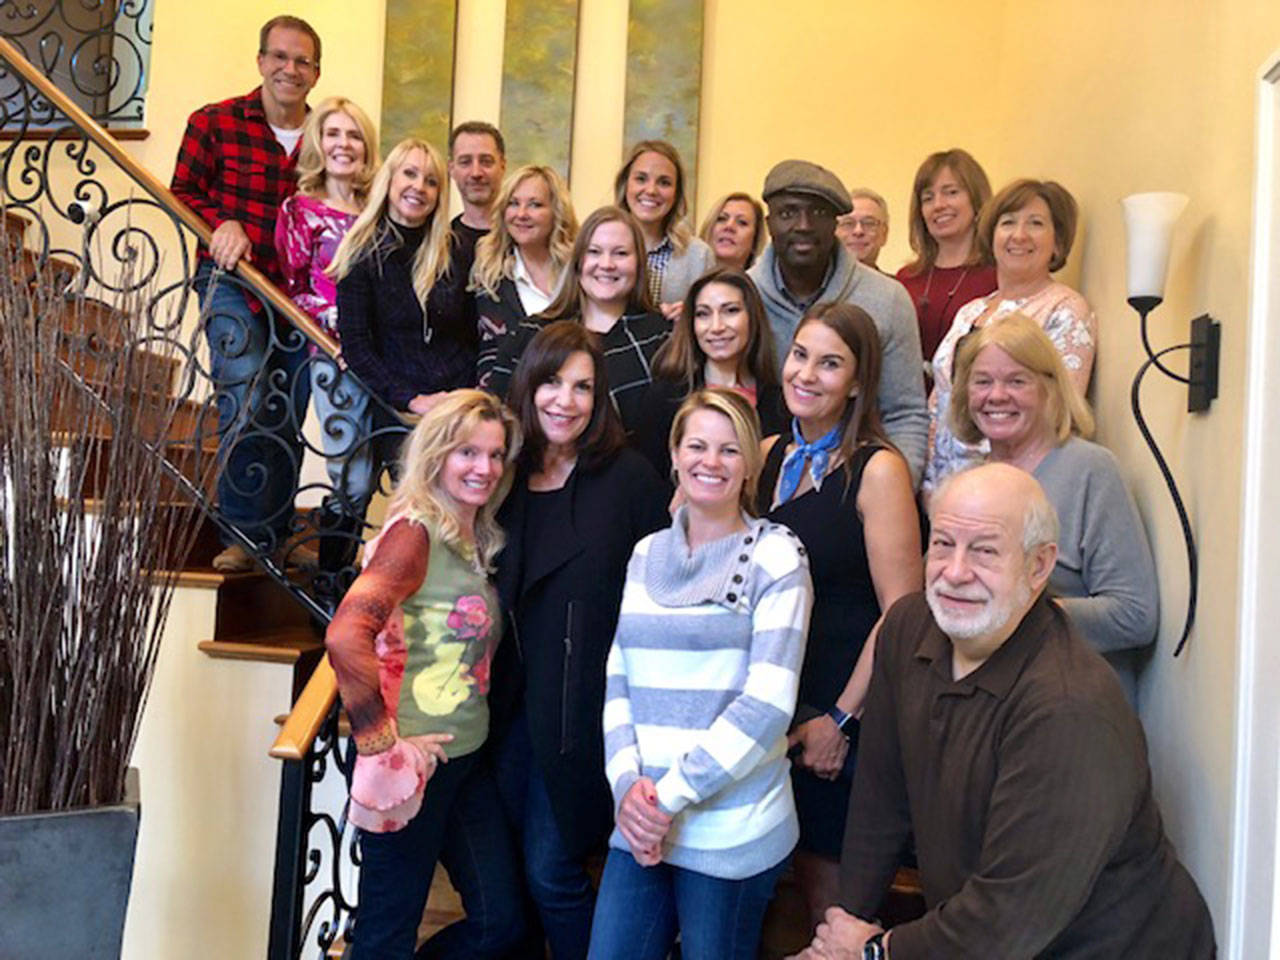 Barbie Young (third from the left) poses in a group shot with the Kirkland Downtown Association Board of Directors. Photo courtesy of Barbie Young